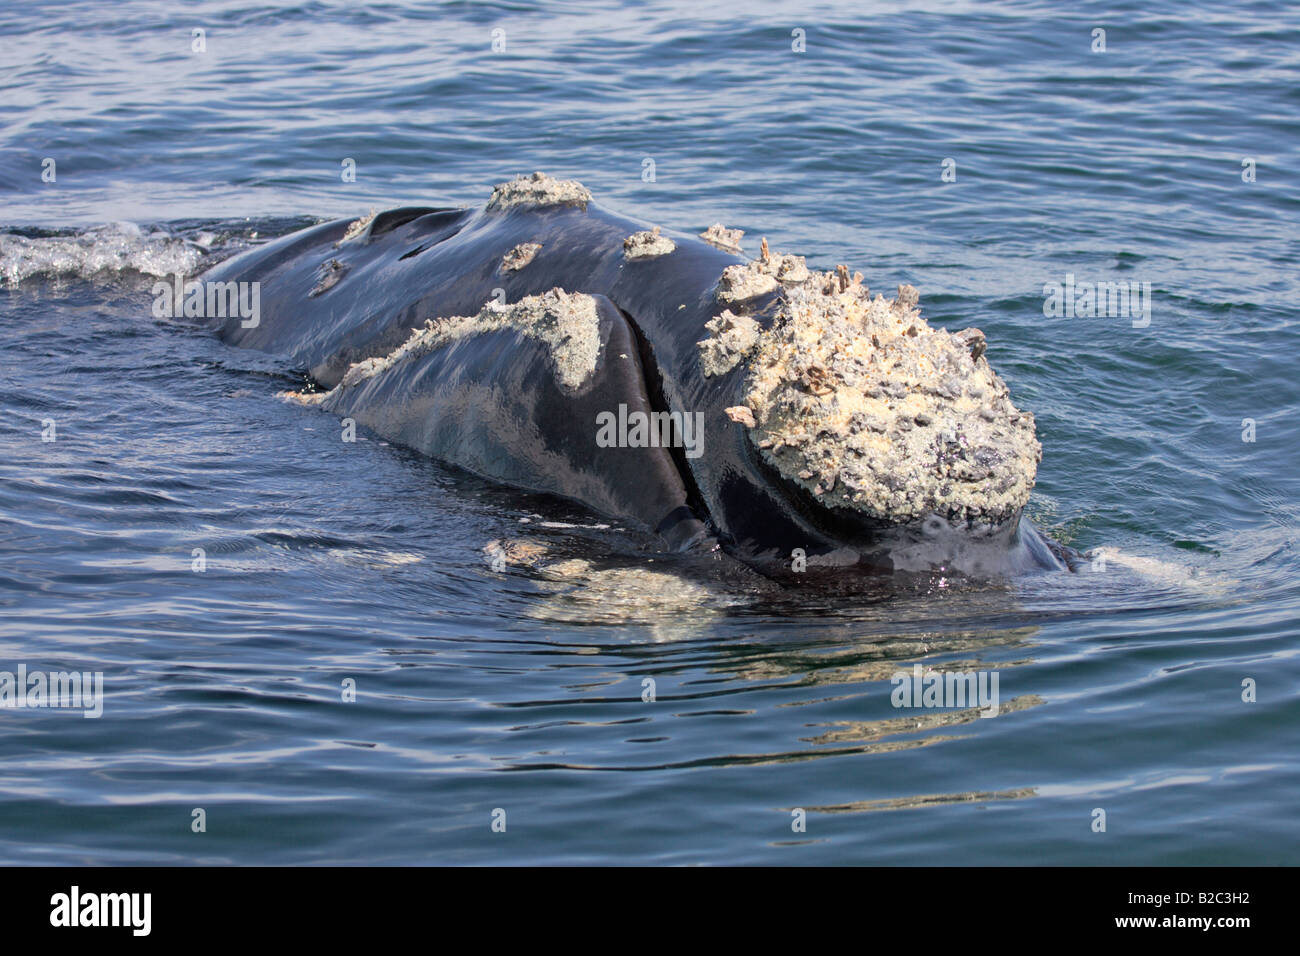 Southern Right Whale (Balaena glacialis) adult, swimming, head, Hermanus, South Africa, Africa Stock Photo